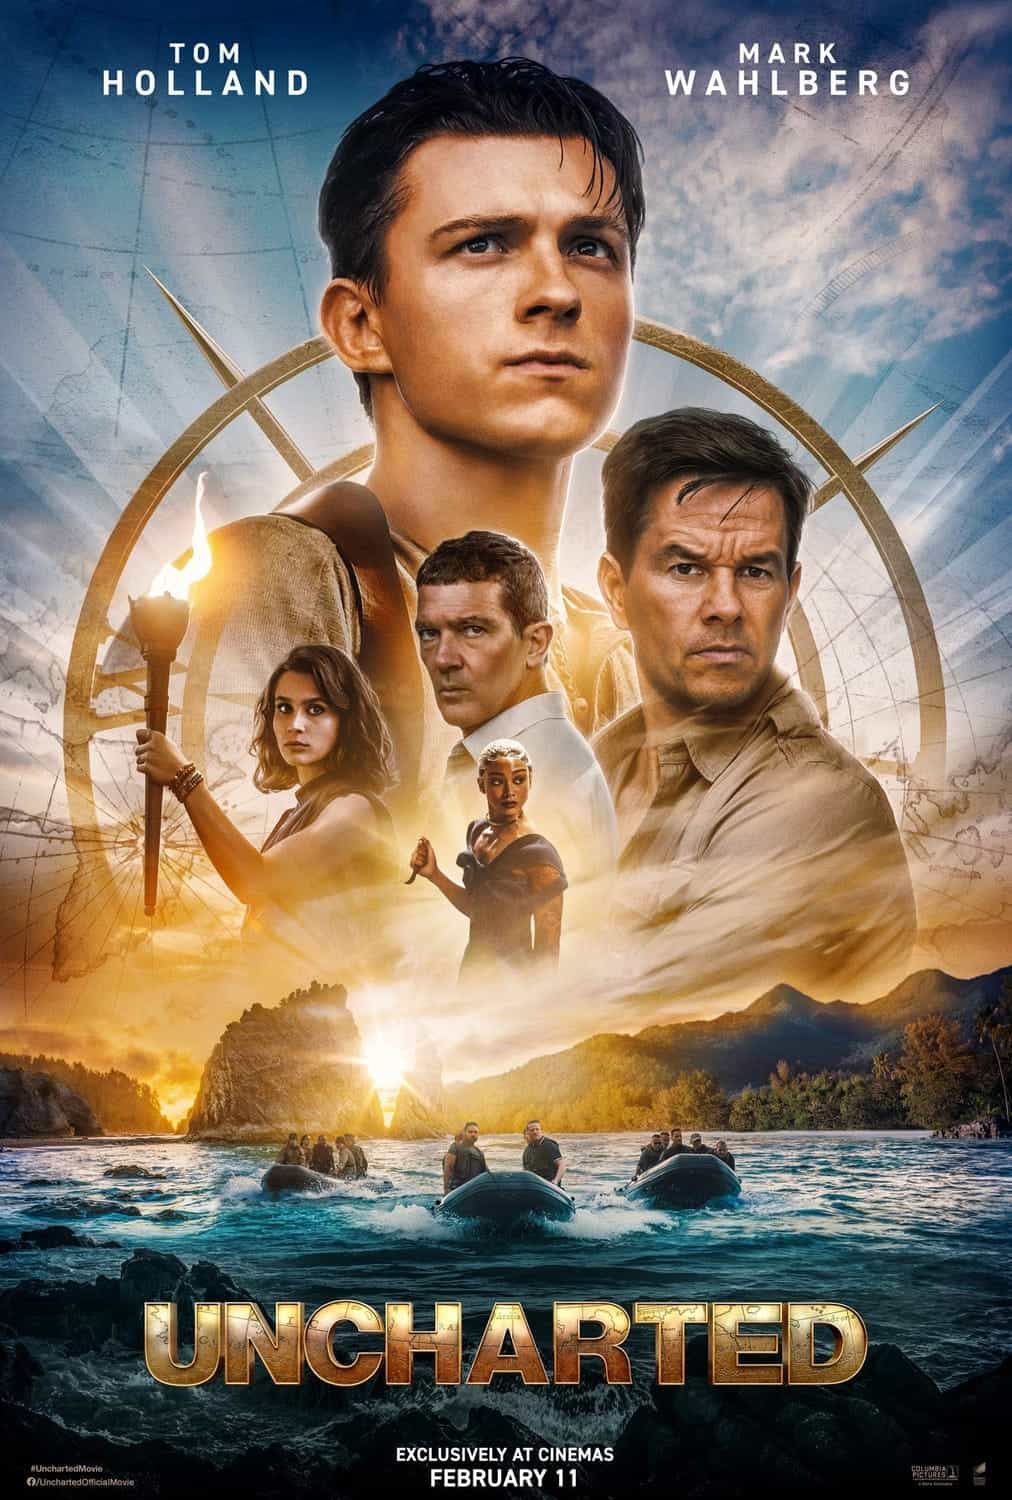 New poster released for Uncharted starring Tom Holland - movie UK release date 11th February 2022 #uncharted